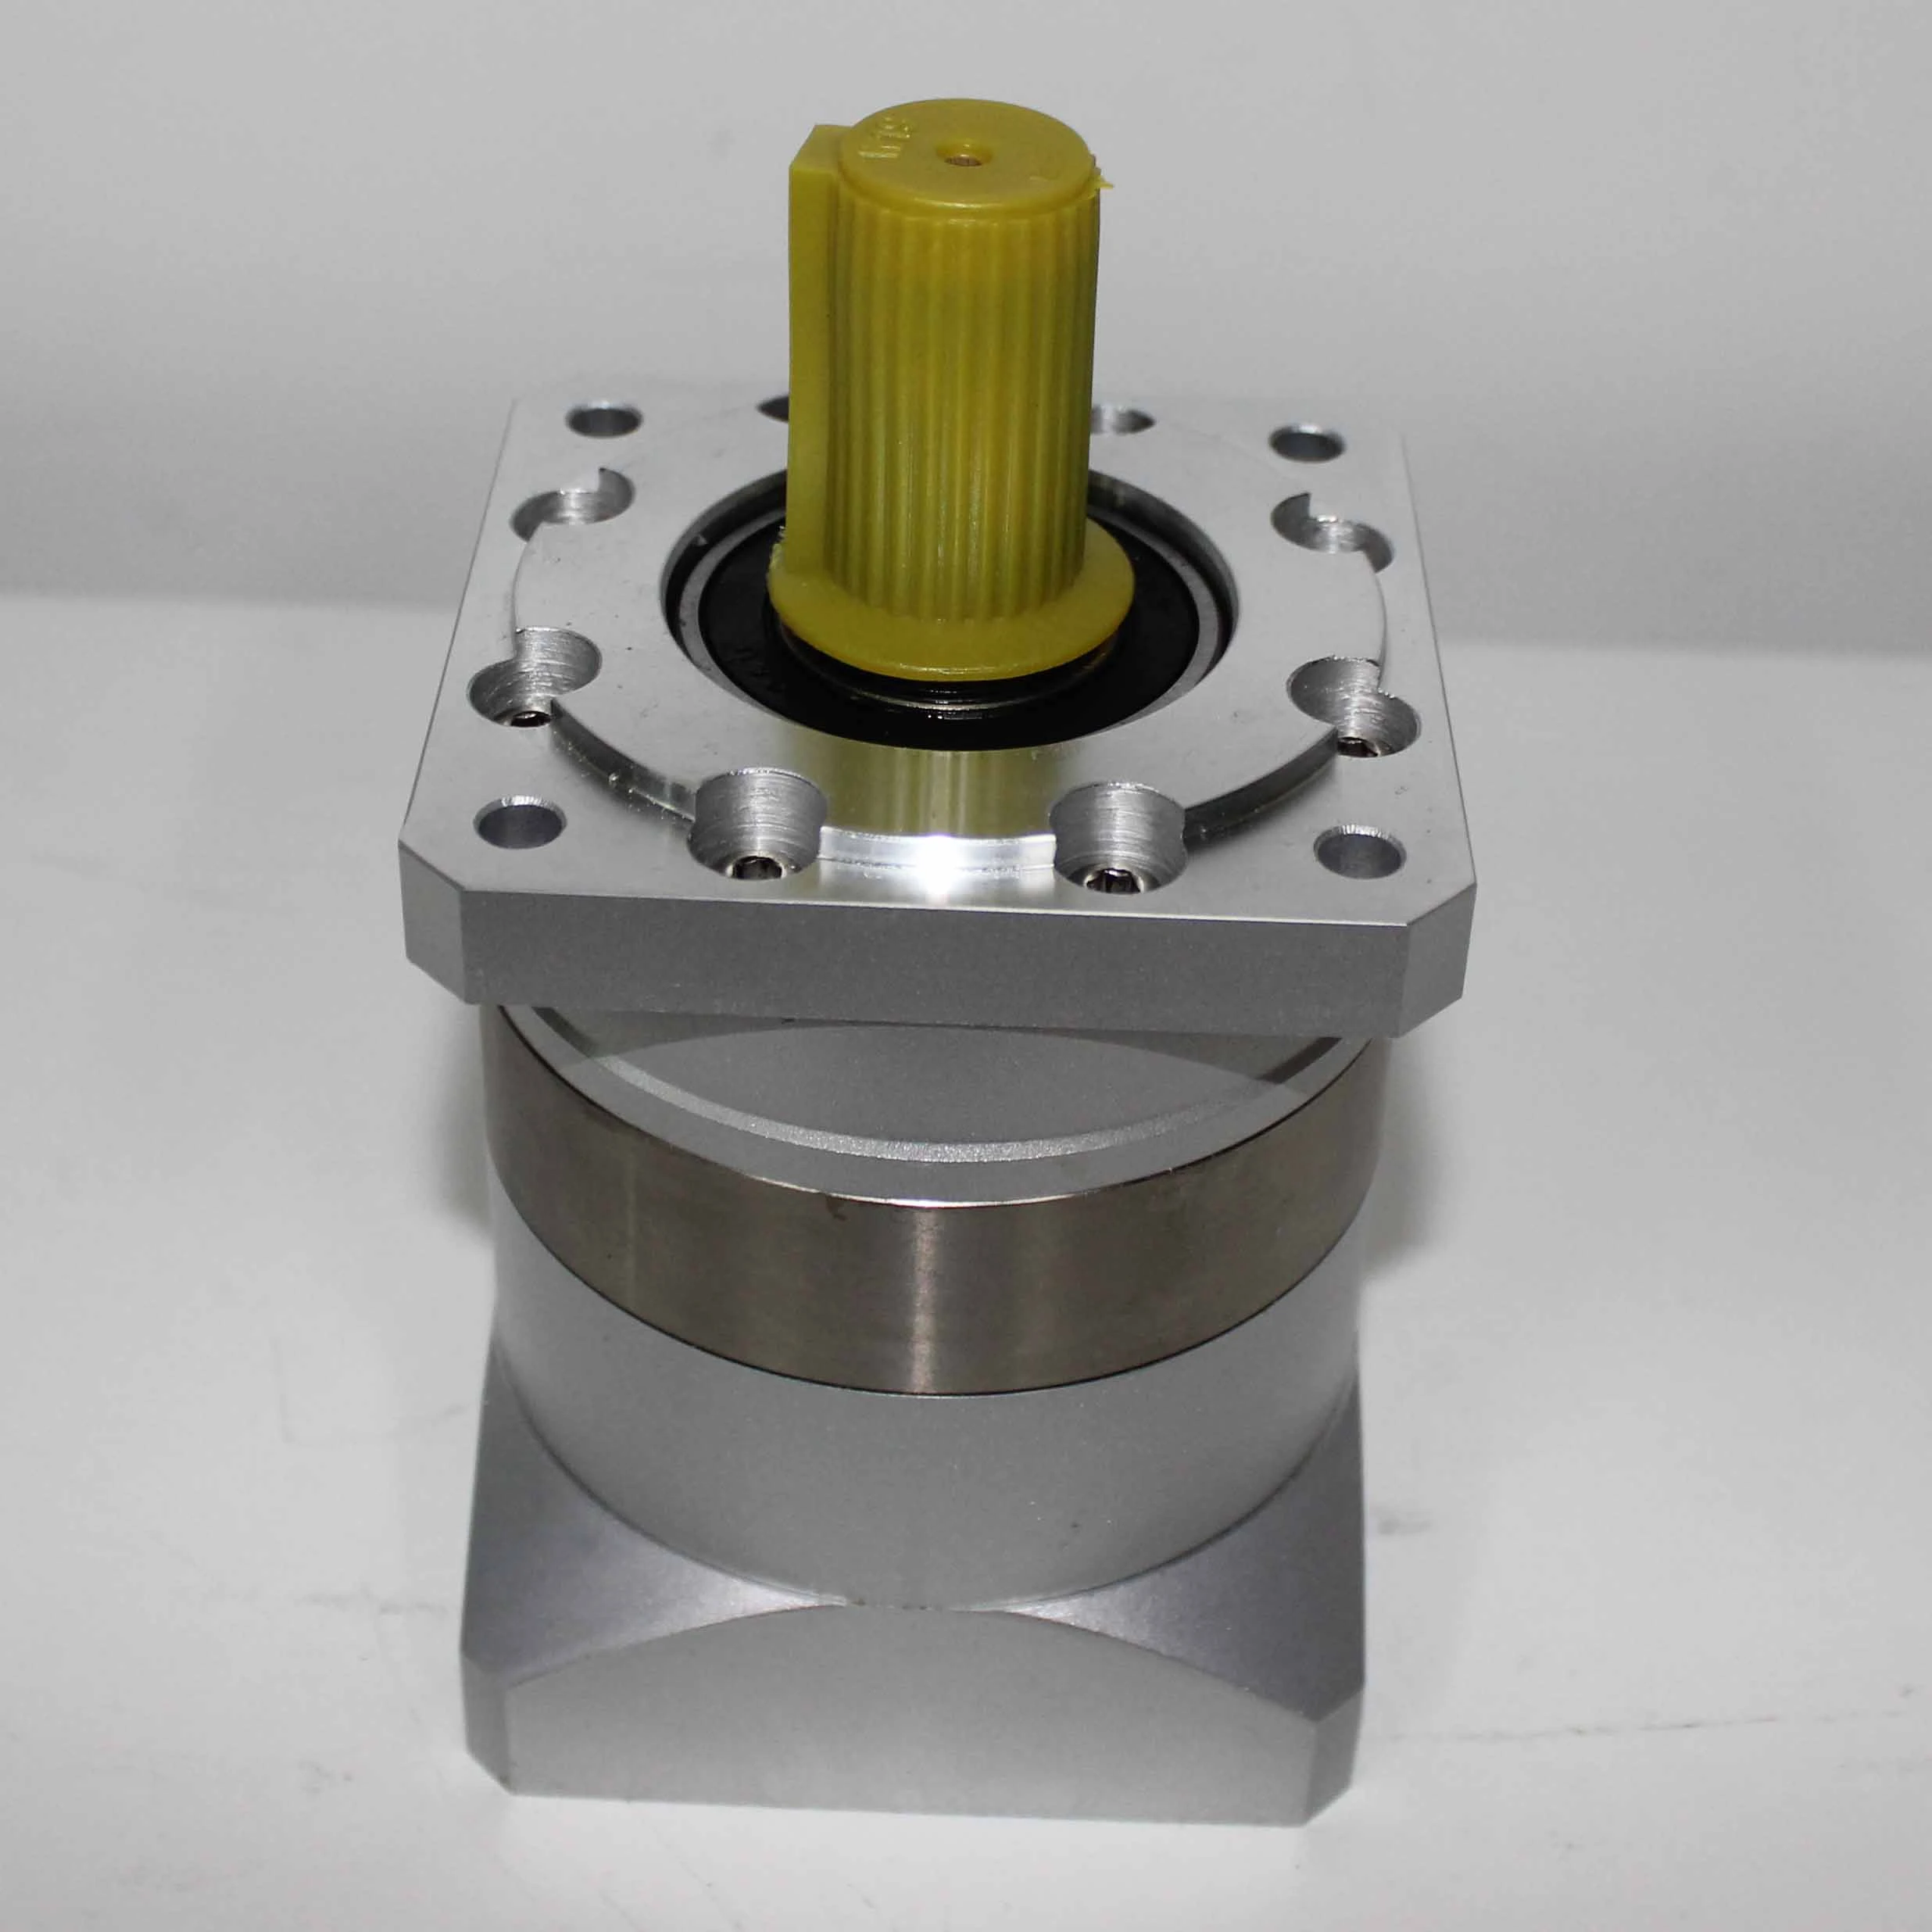 90mm Frame Size Planetary Reducer Gearbox PLF90 3:1 4:1 5:1 7:1 10:1 first stage gear ratio for Lichuan stepper and servo system